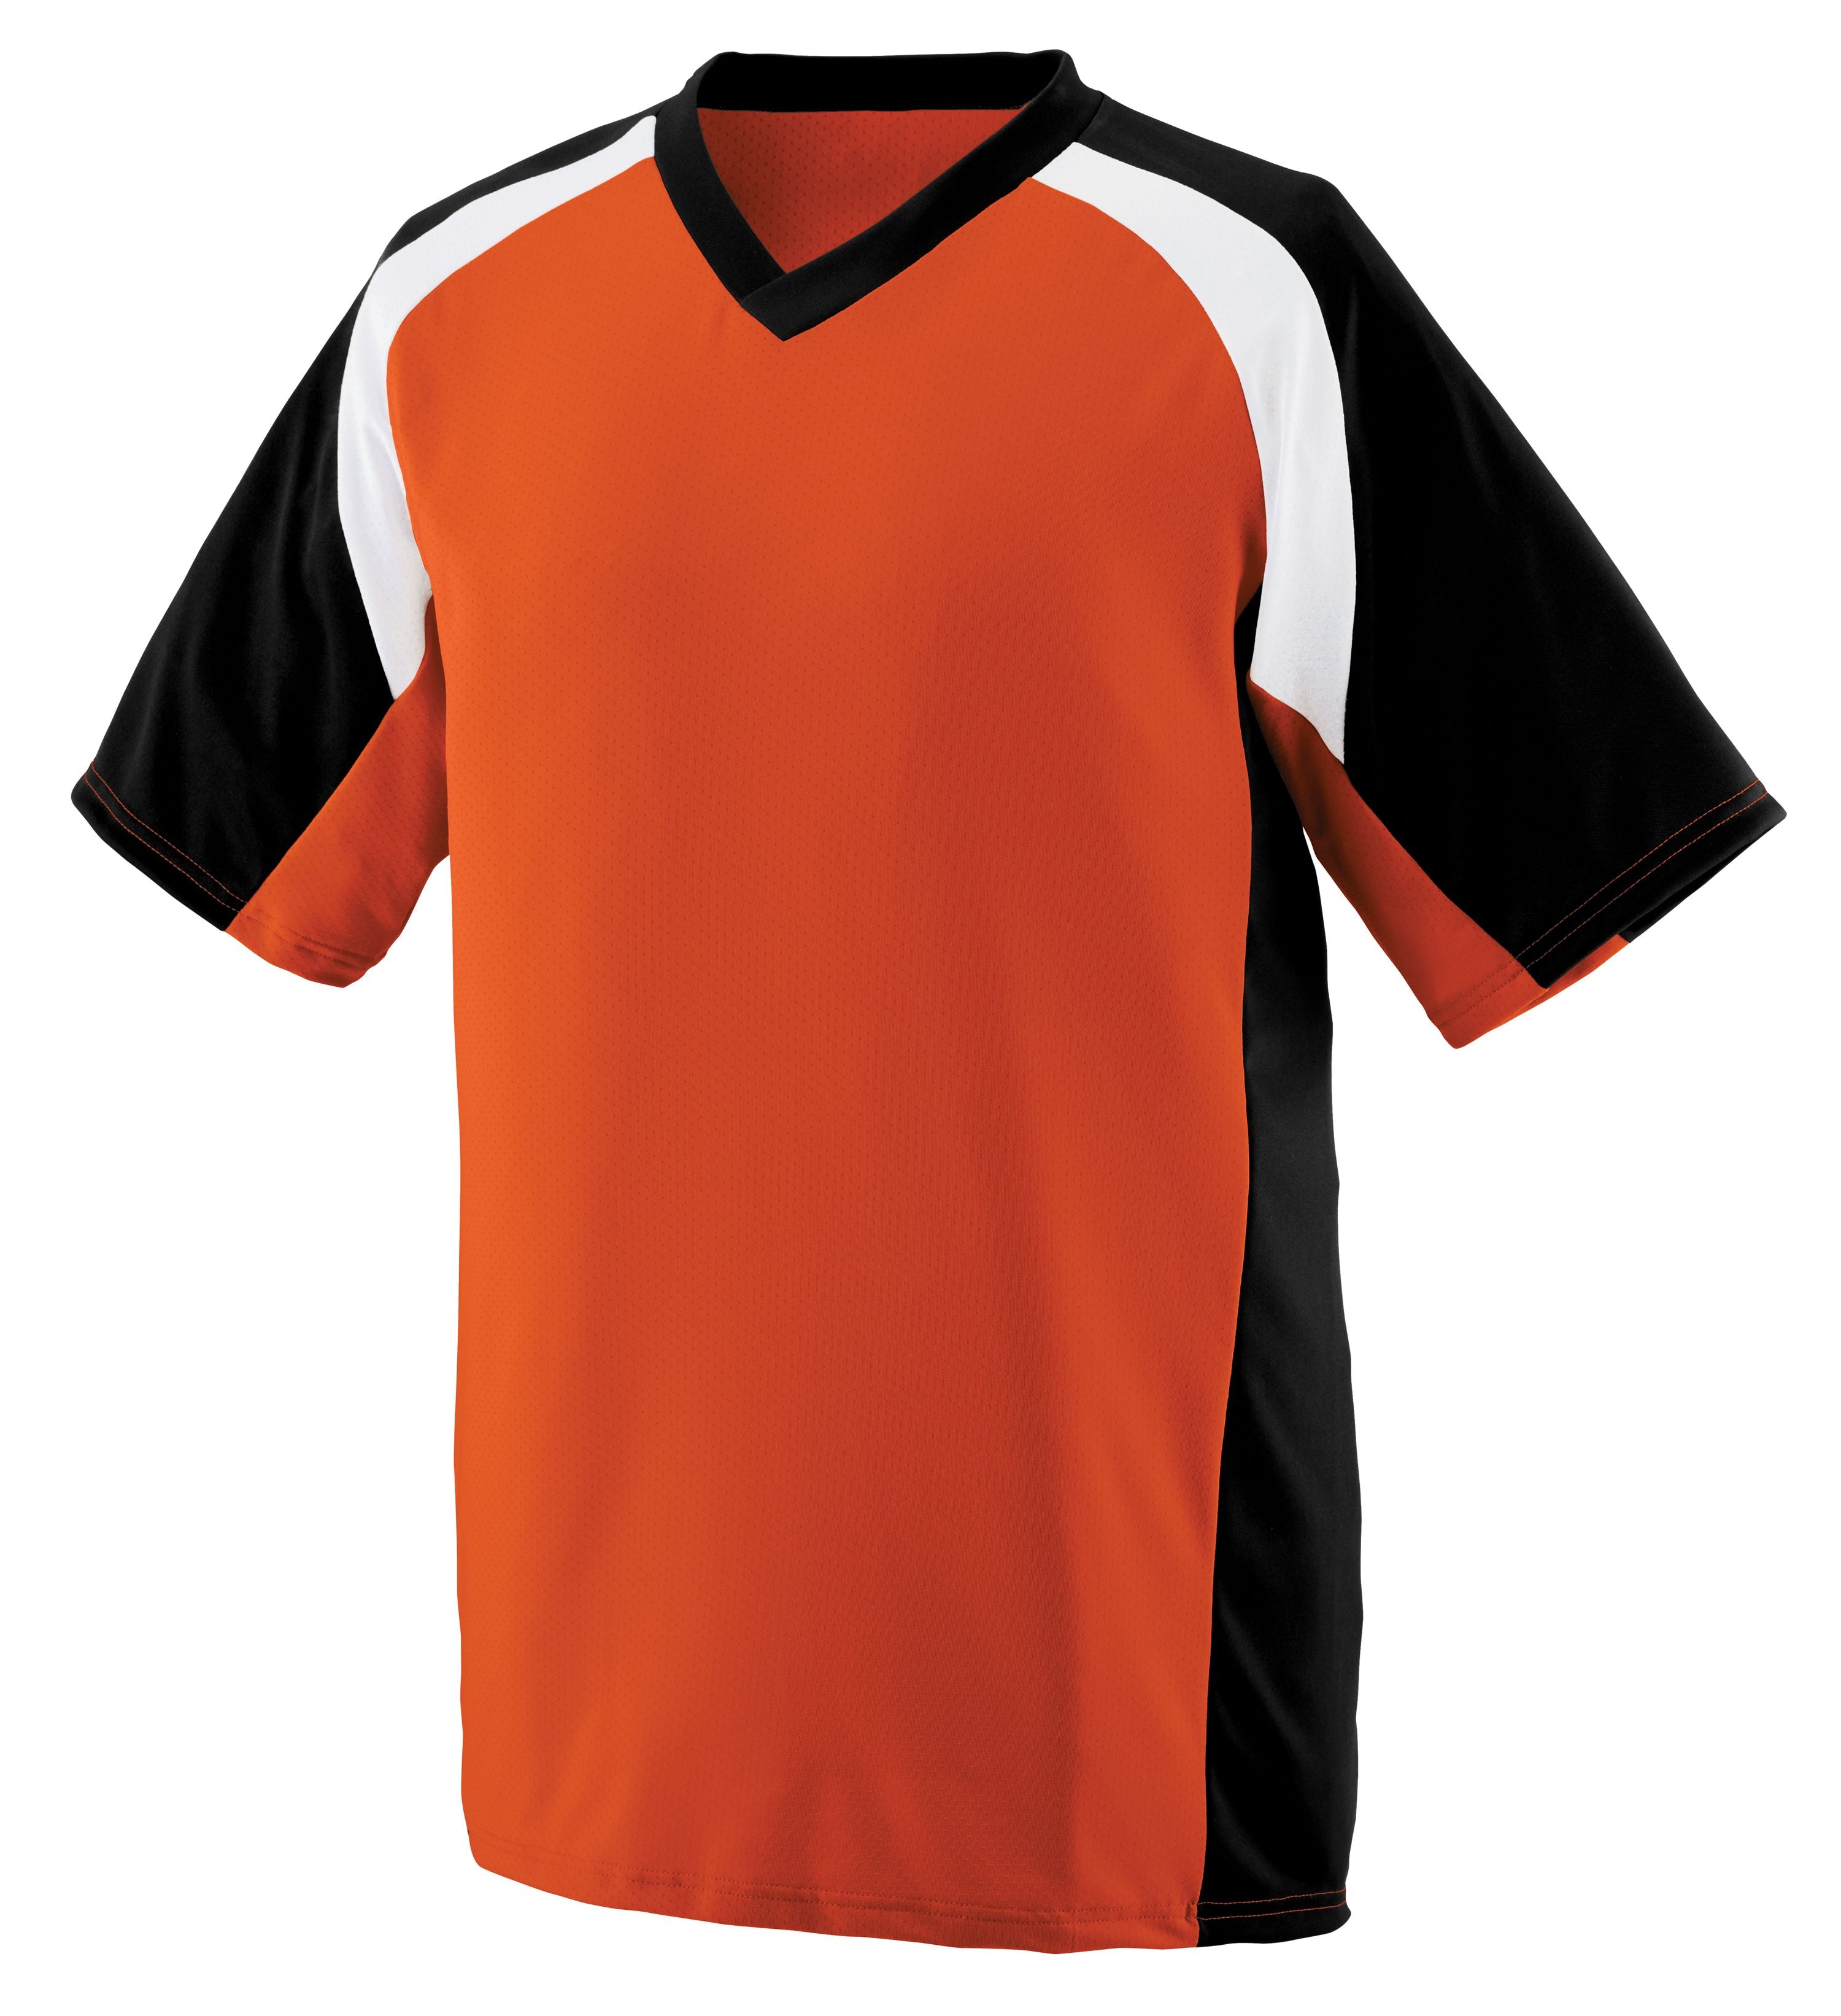 Augusta Sportswear Nitro Jersey in Orange/Black/White  -Part of the Adult, Adult-Jersey, Augusta-Products, Football, Shirts, All-Sports, All-Sports-1 product lines at KanaleyCreations.com